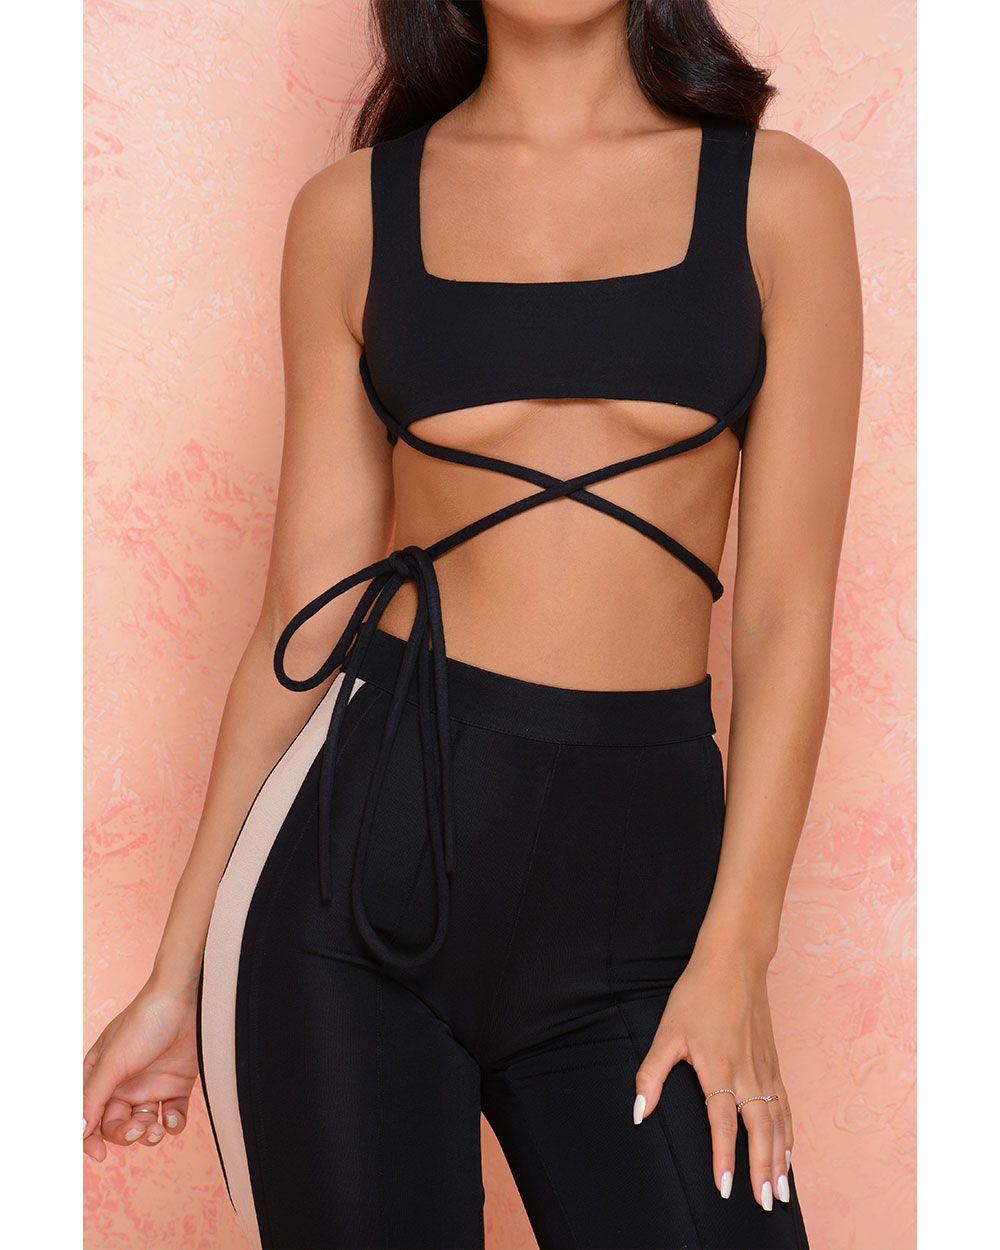 Hold The Line Underbust Criss Cross Crop Top in Black